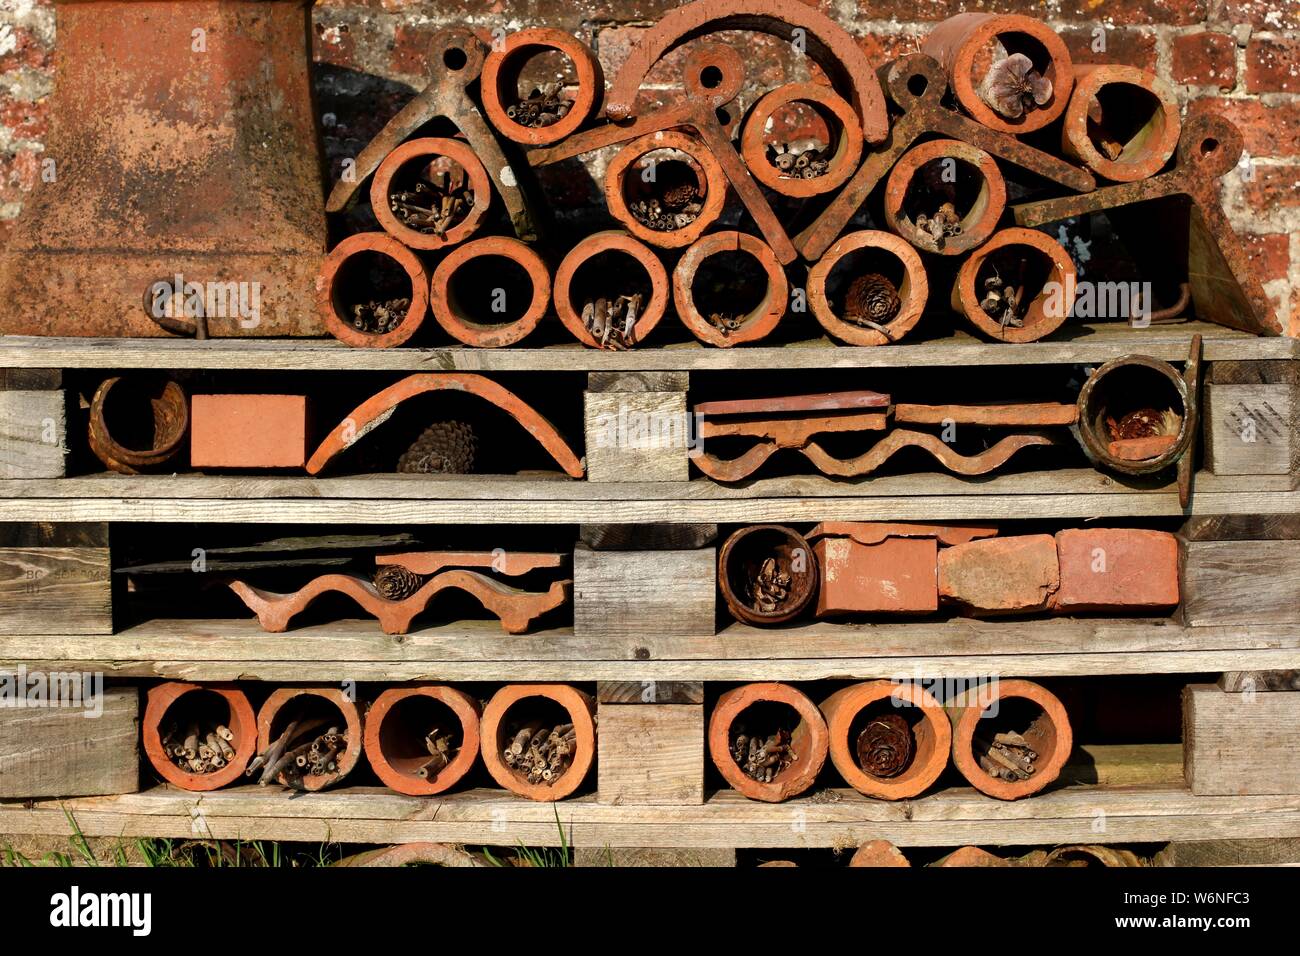 Insect and bee hotel made from terracotta tiles,pipes and wooden pallets Stock Photo